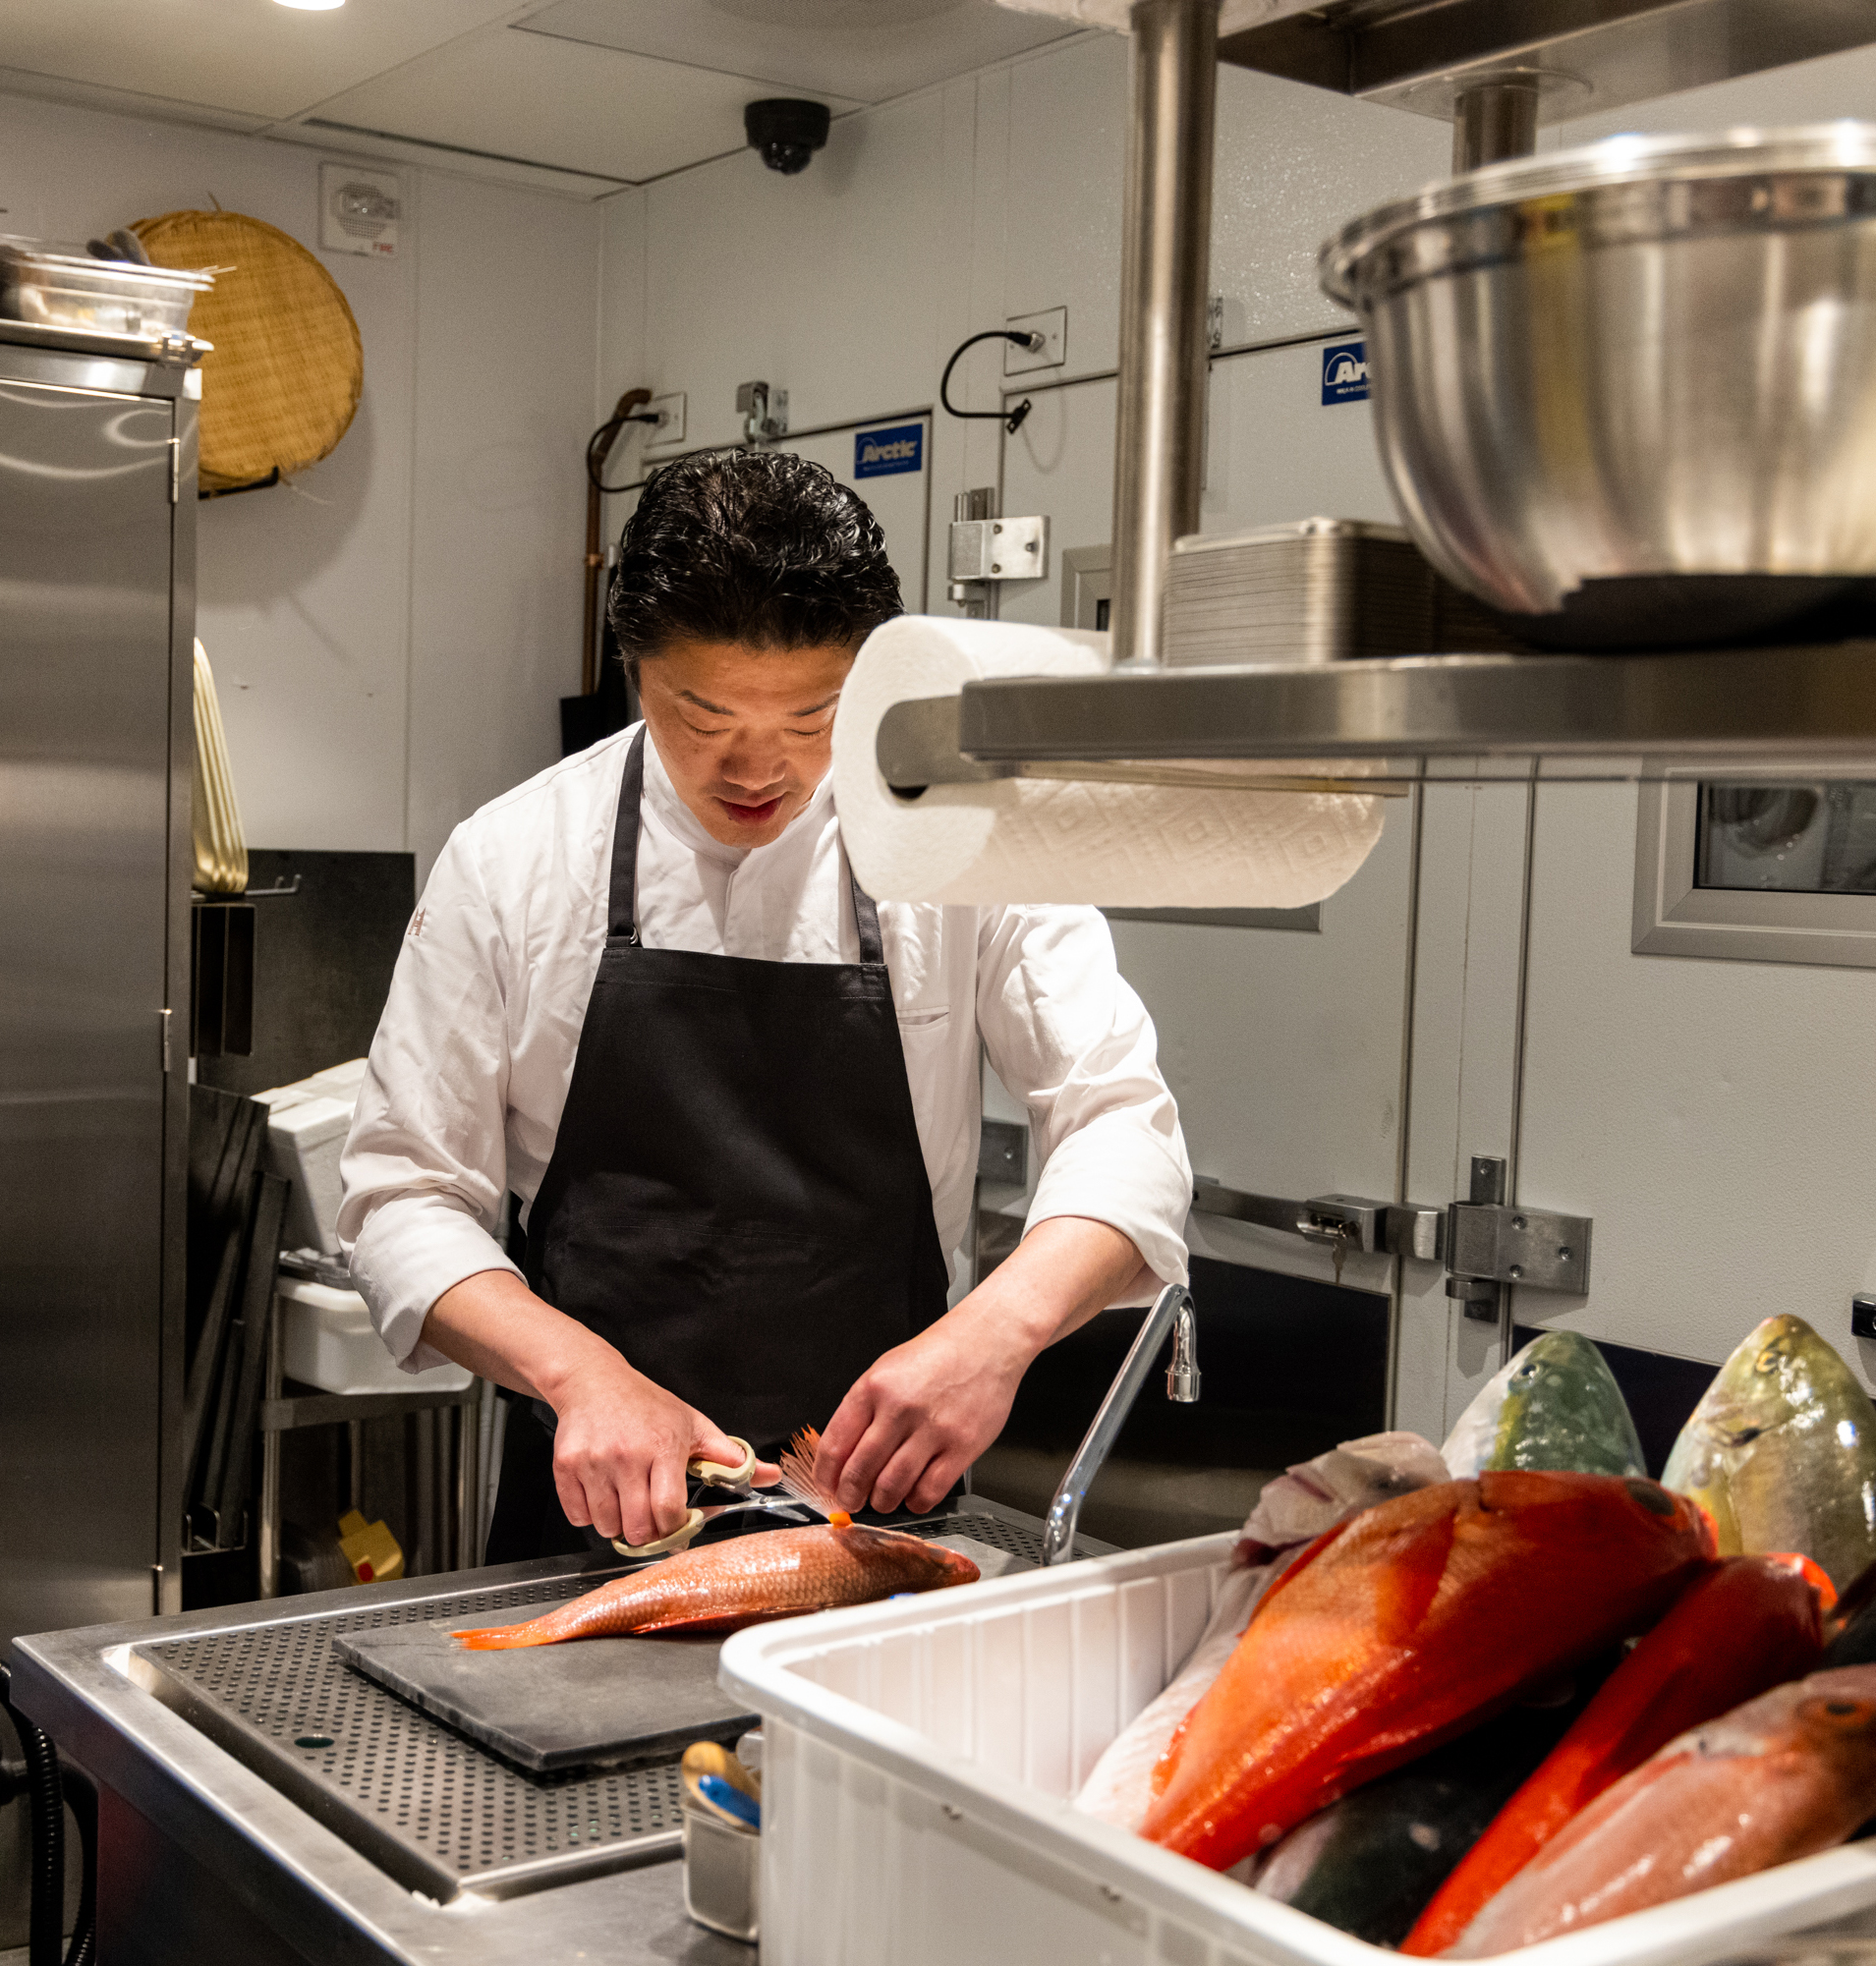 A chef wearing a white coat and black apron is filleting a fish in a professional kitchen. Several whole fish are in a white tub beside him, with utensils nearby.